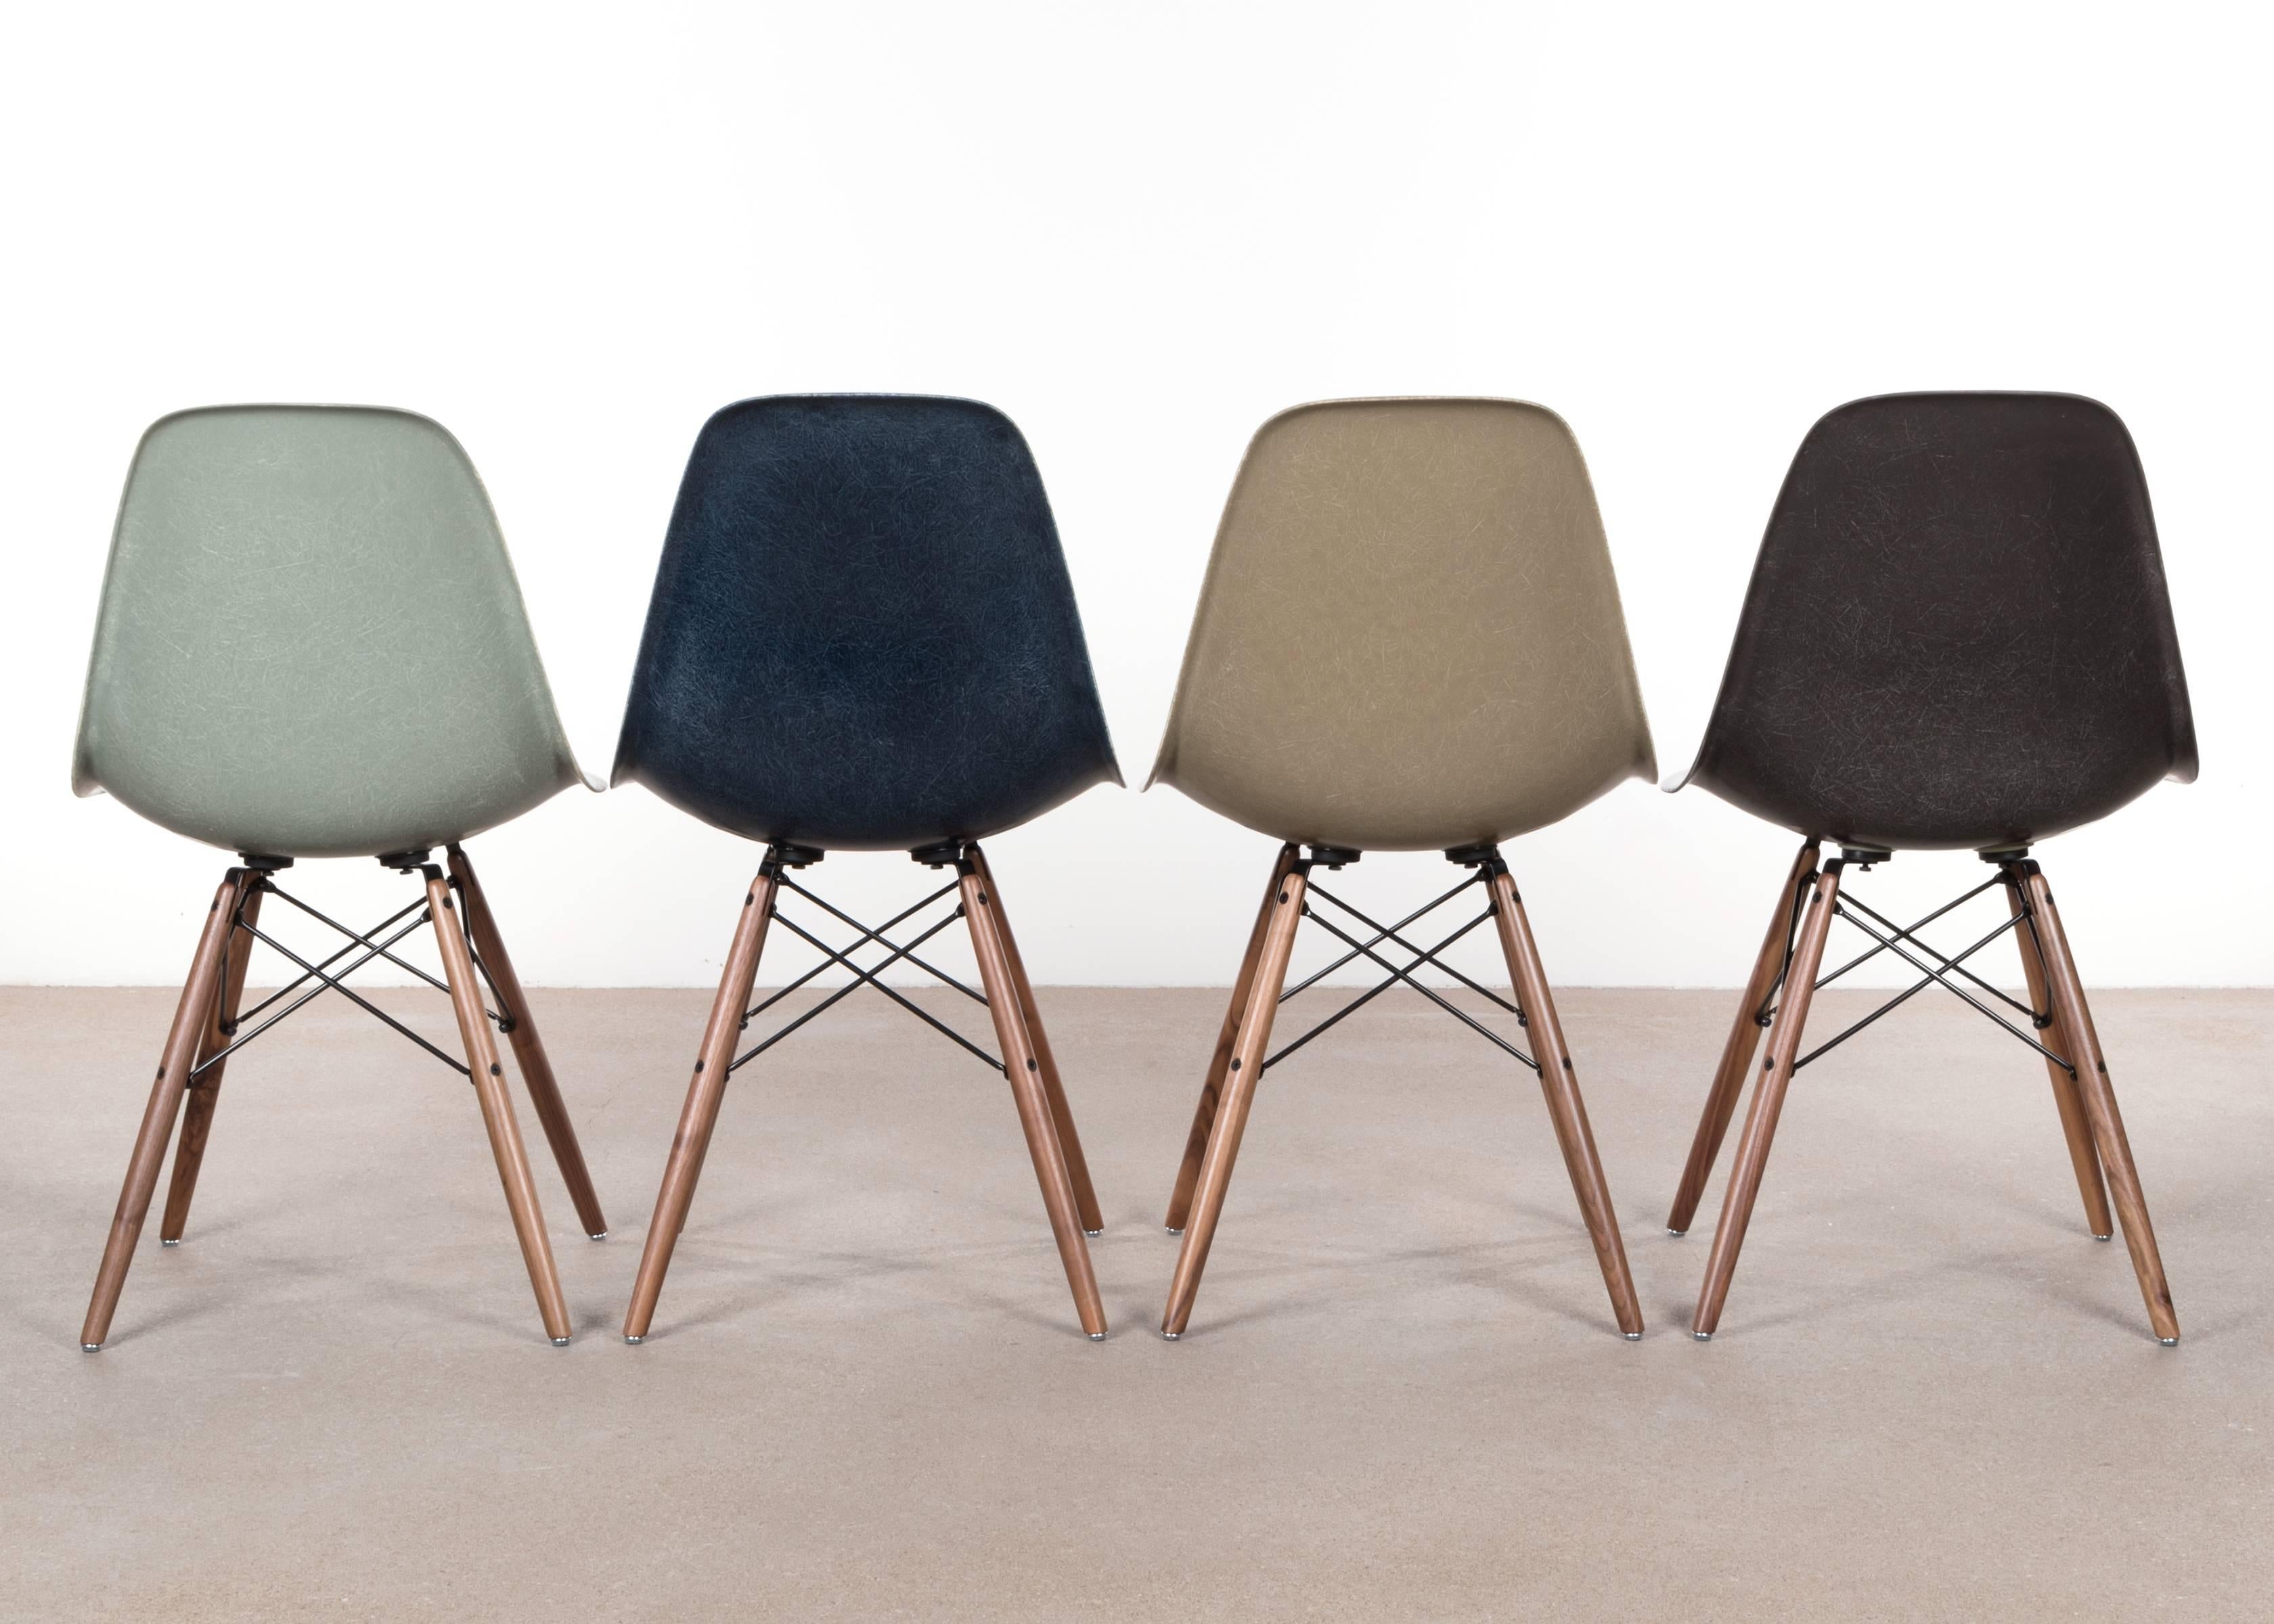 Beautiful iconic DSW chairs in colors: sea foam green, navy blue, raw umber and charcoal.
Shells are in very good or excellent condition with only slight traces of use. Replaced shock mounts which guarantee save usability for the next decades. Each